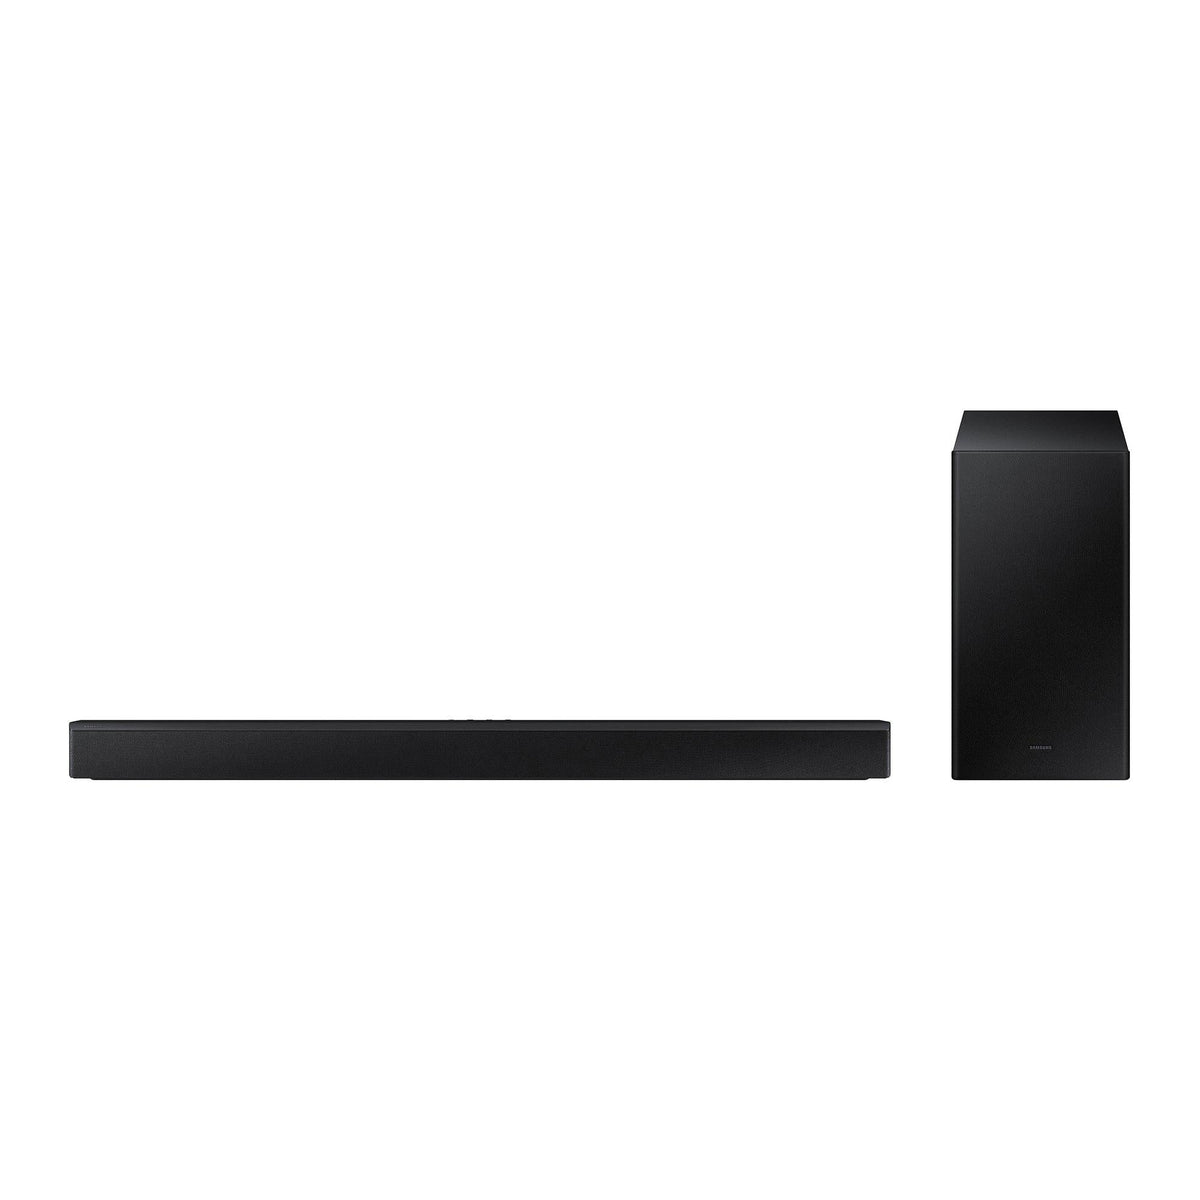 Samsung 2.1 Channel Soundbar with Wireless Subwoofer - Electrical